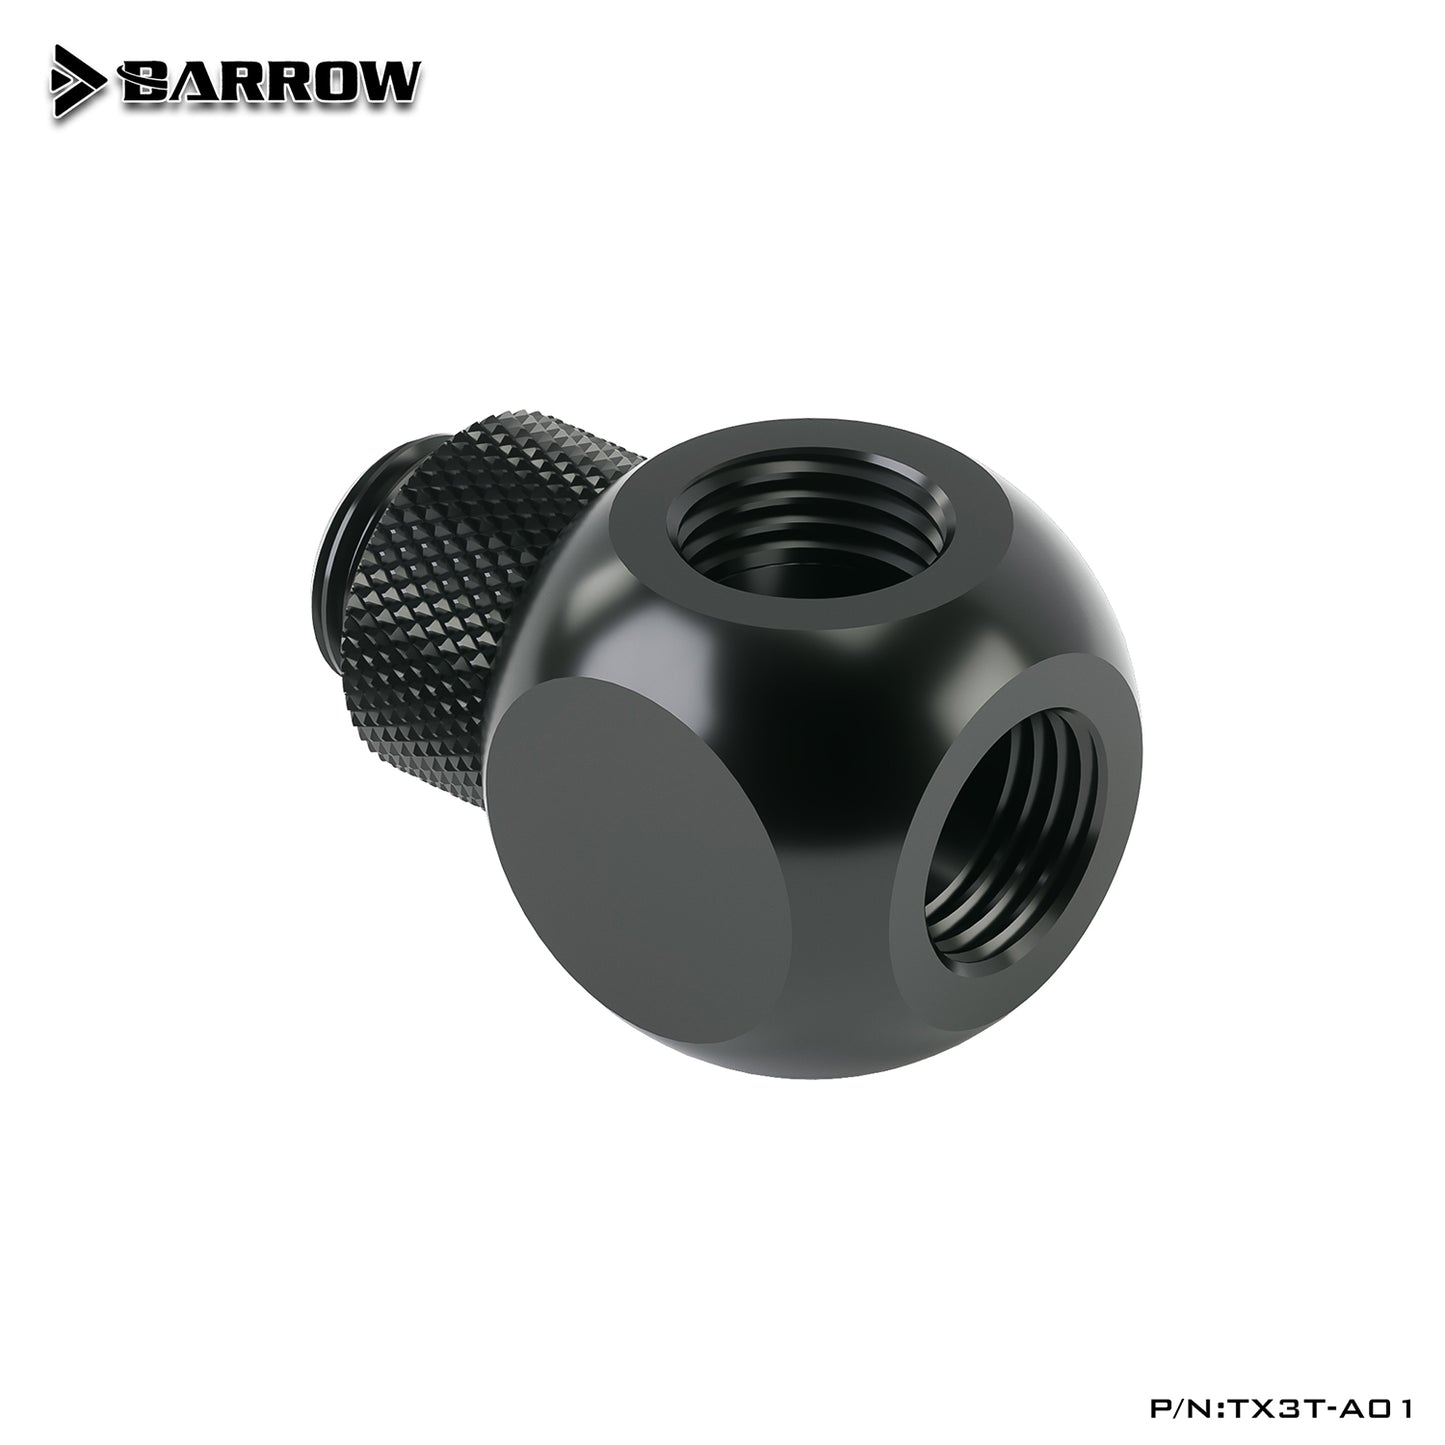 Barrow G1 /4"X3 Extender Rotation,3-Way Cubic Adaptor Seat Water Cooling Computer Accessories, TX3T-A01